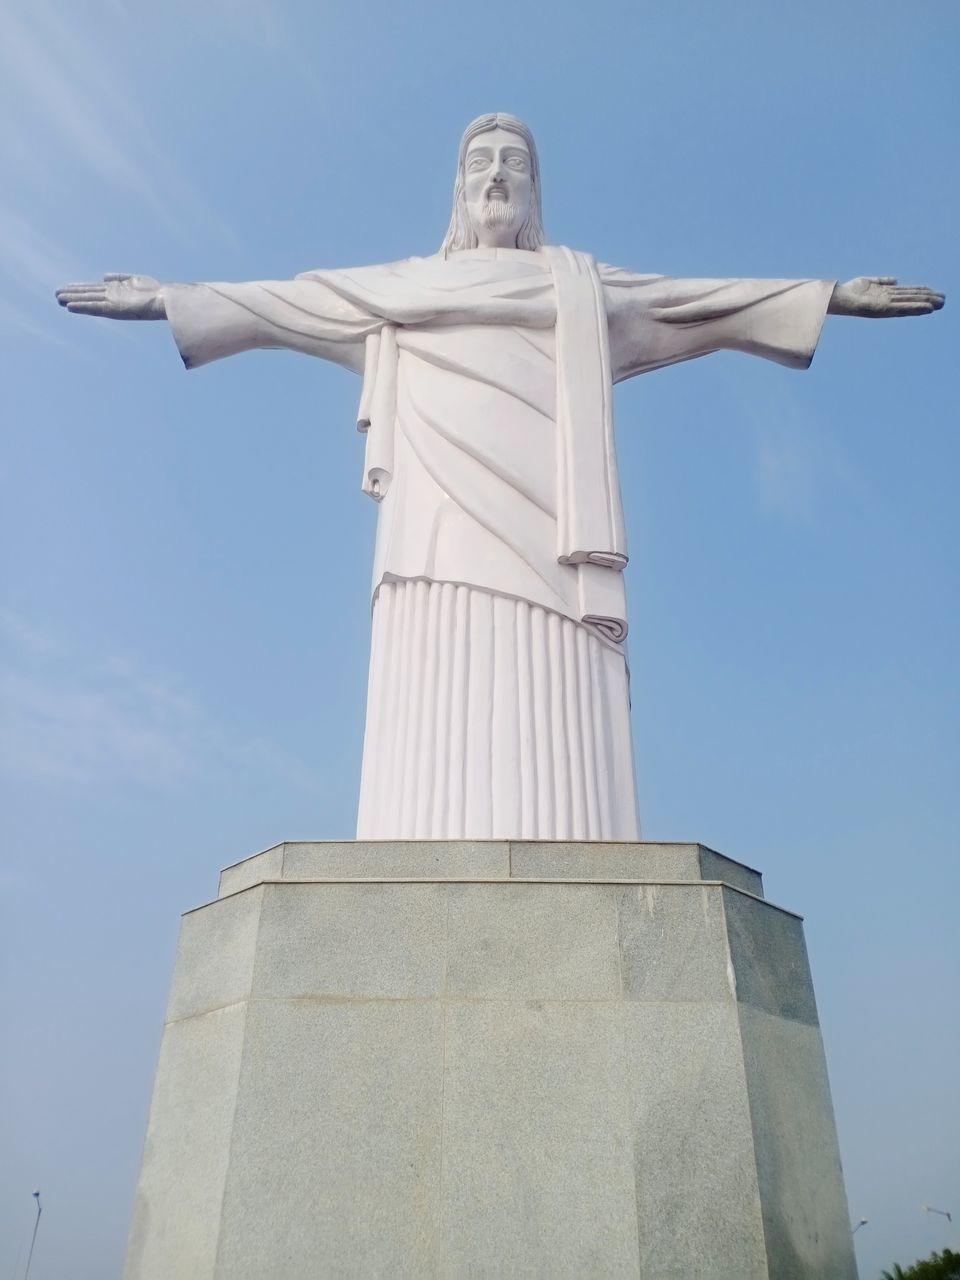 LOW ANGLE VIEW OF CROSS STATUE AGAINST SKY